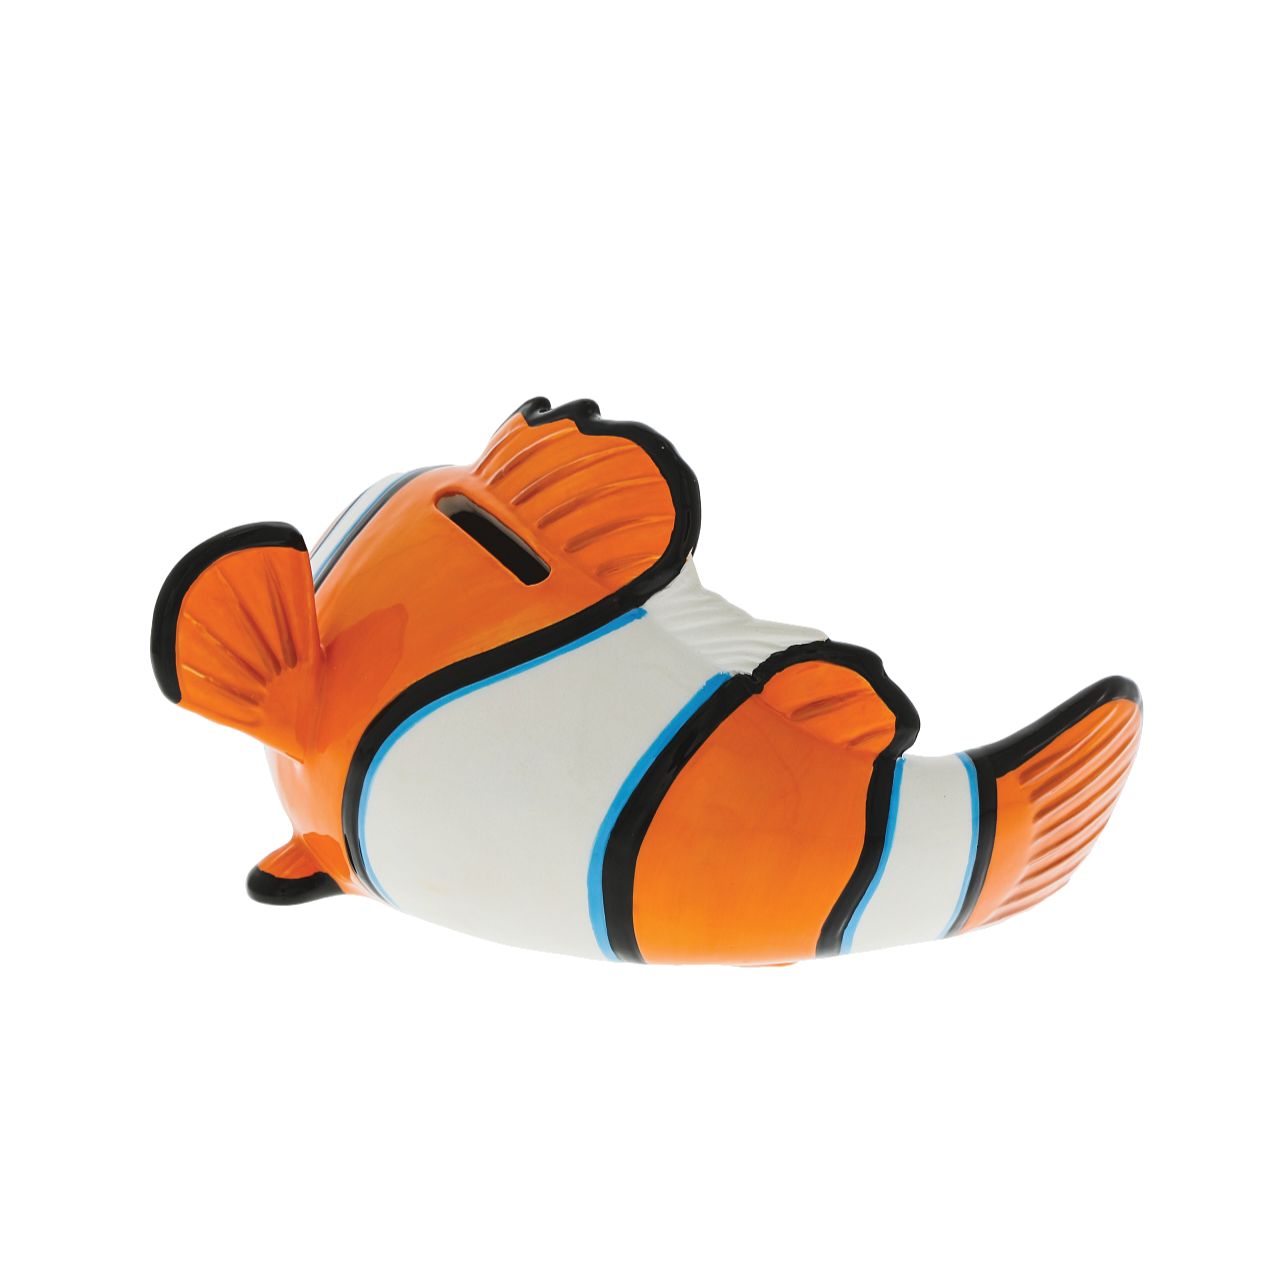 Sharkbait Finding Nemo Money Bank  Featured here is the energetic young clownfish, Sharkbait trying to get back home to the reef and his dad. Save all your pennies is this beautifully sculpted Finding Nemo money bank. The perfect gift for any pixar fan. This ceramic home accessory is only available from the Enchanting Disney Collection.